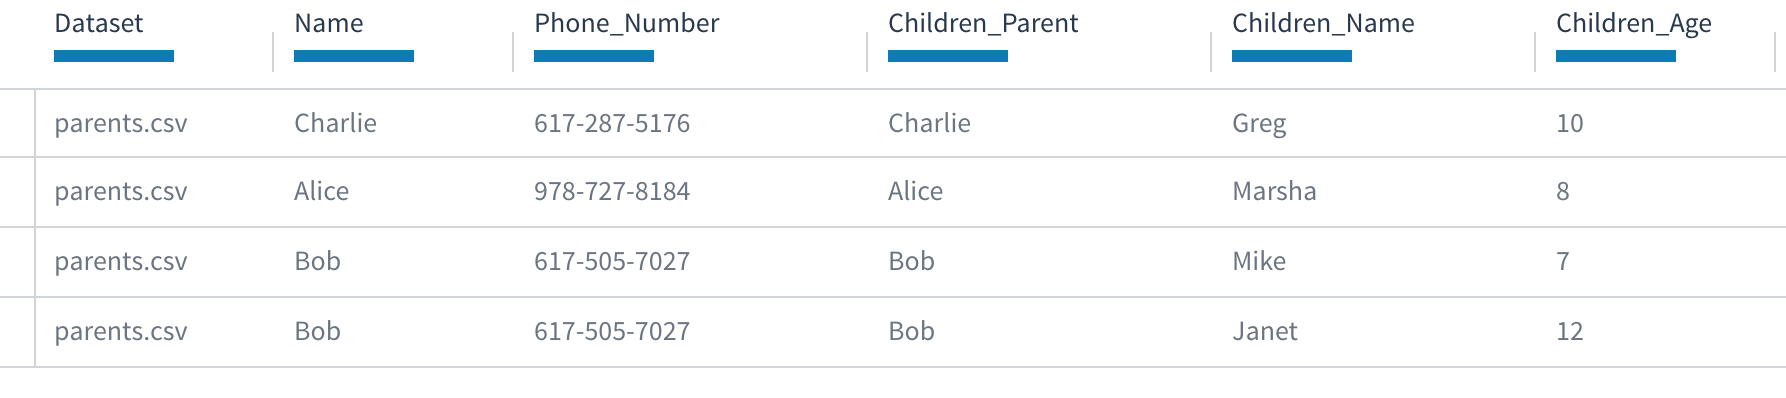 The JOIN statement populates the fields with values from the children.csv file: Charlie and Alice are each parents on one child, while Bob is the parent of two children.